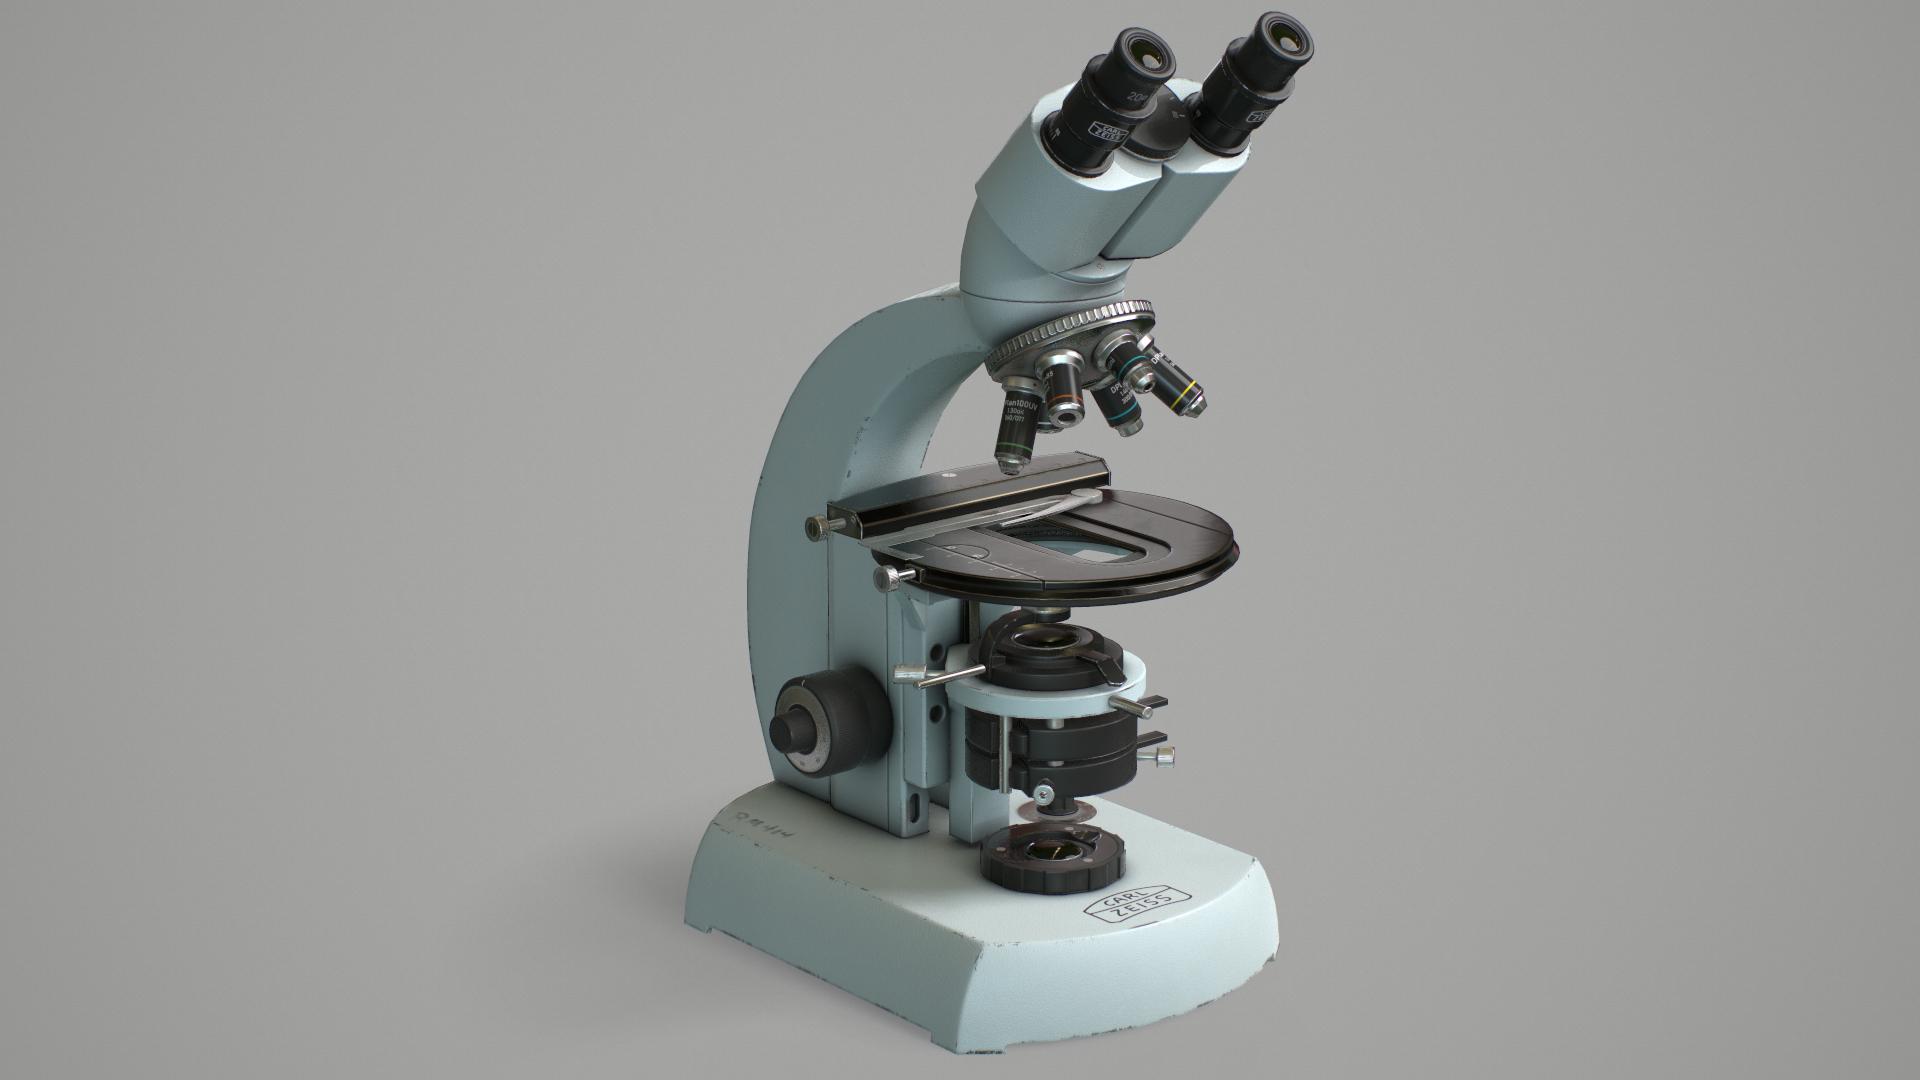 Render of a zeiss microscope